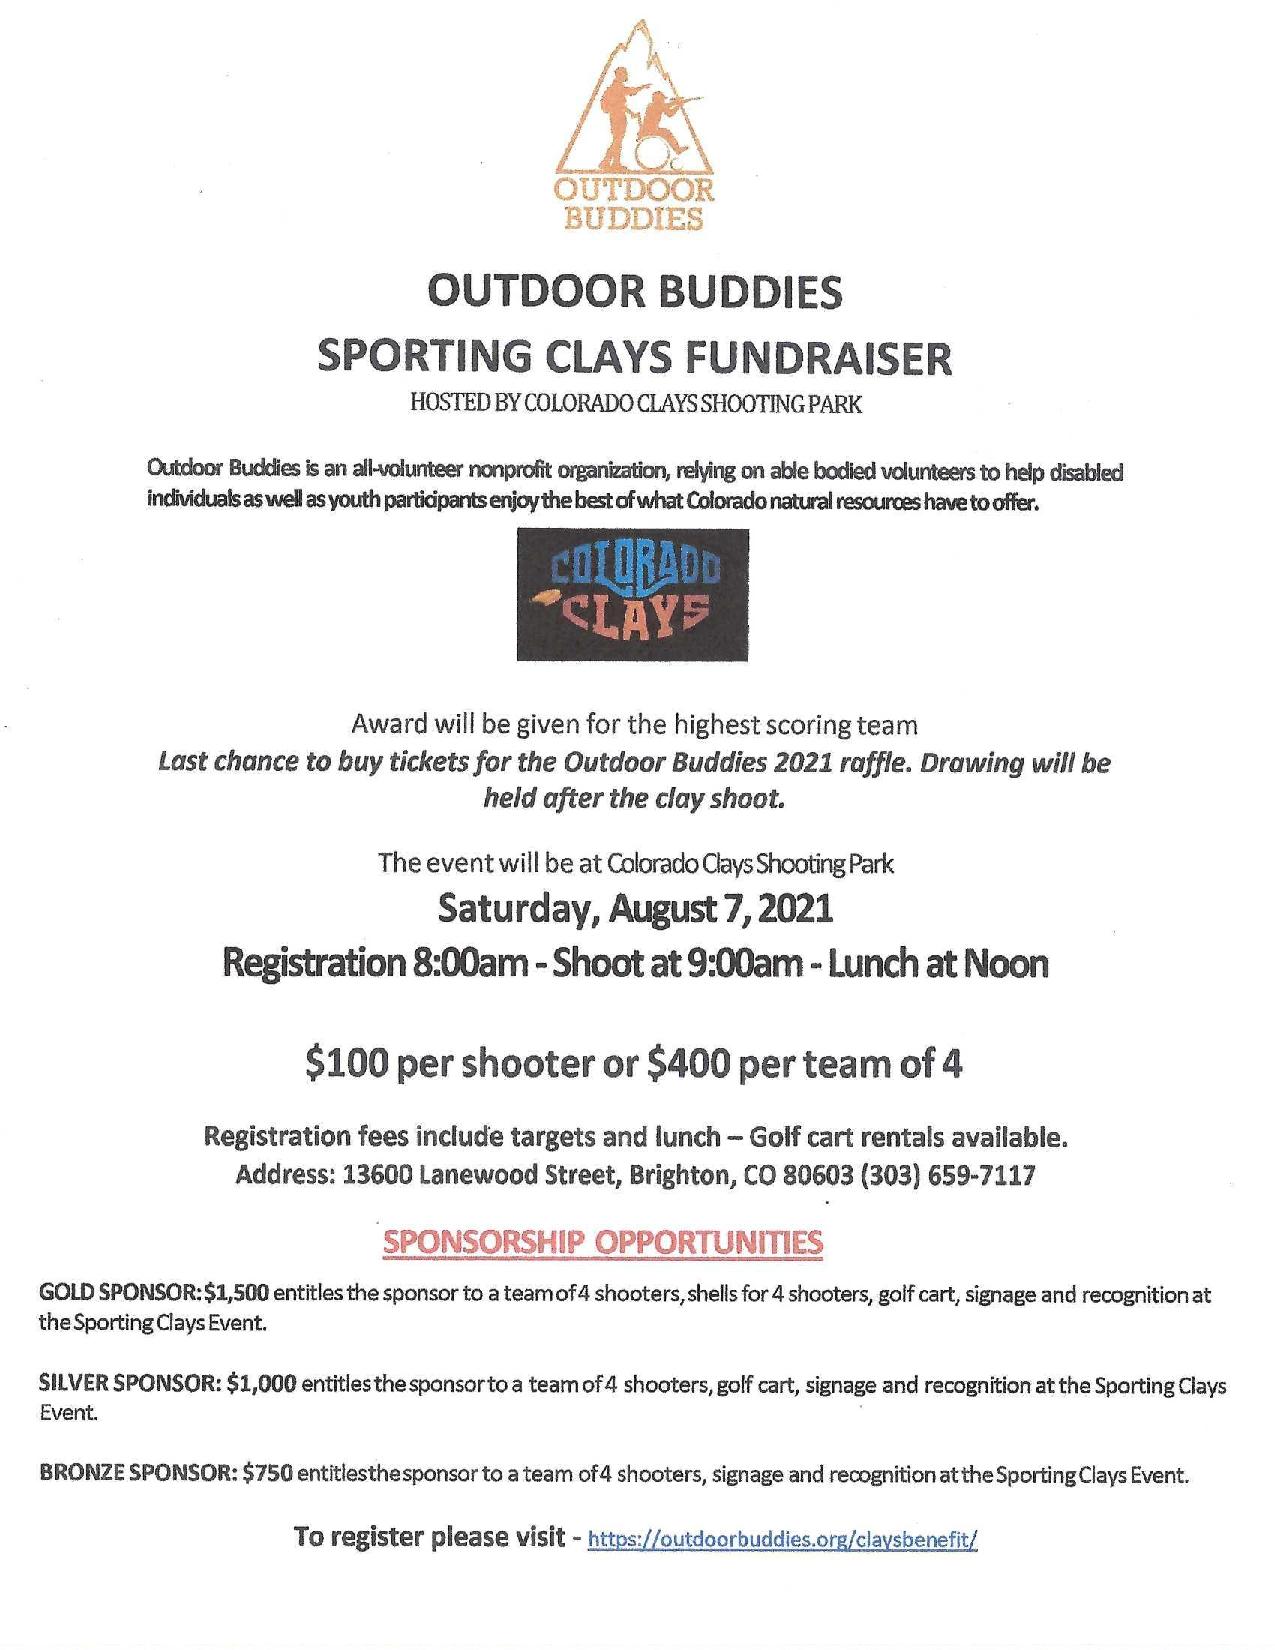 2021 Outdoor Buddies Sporting Clays Fundraiser